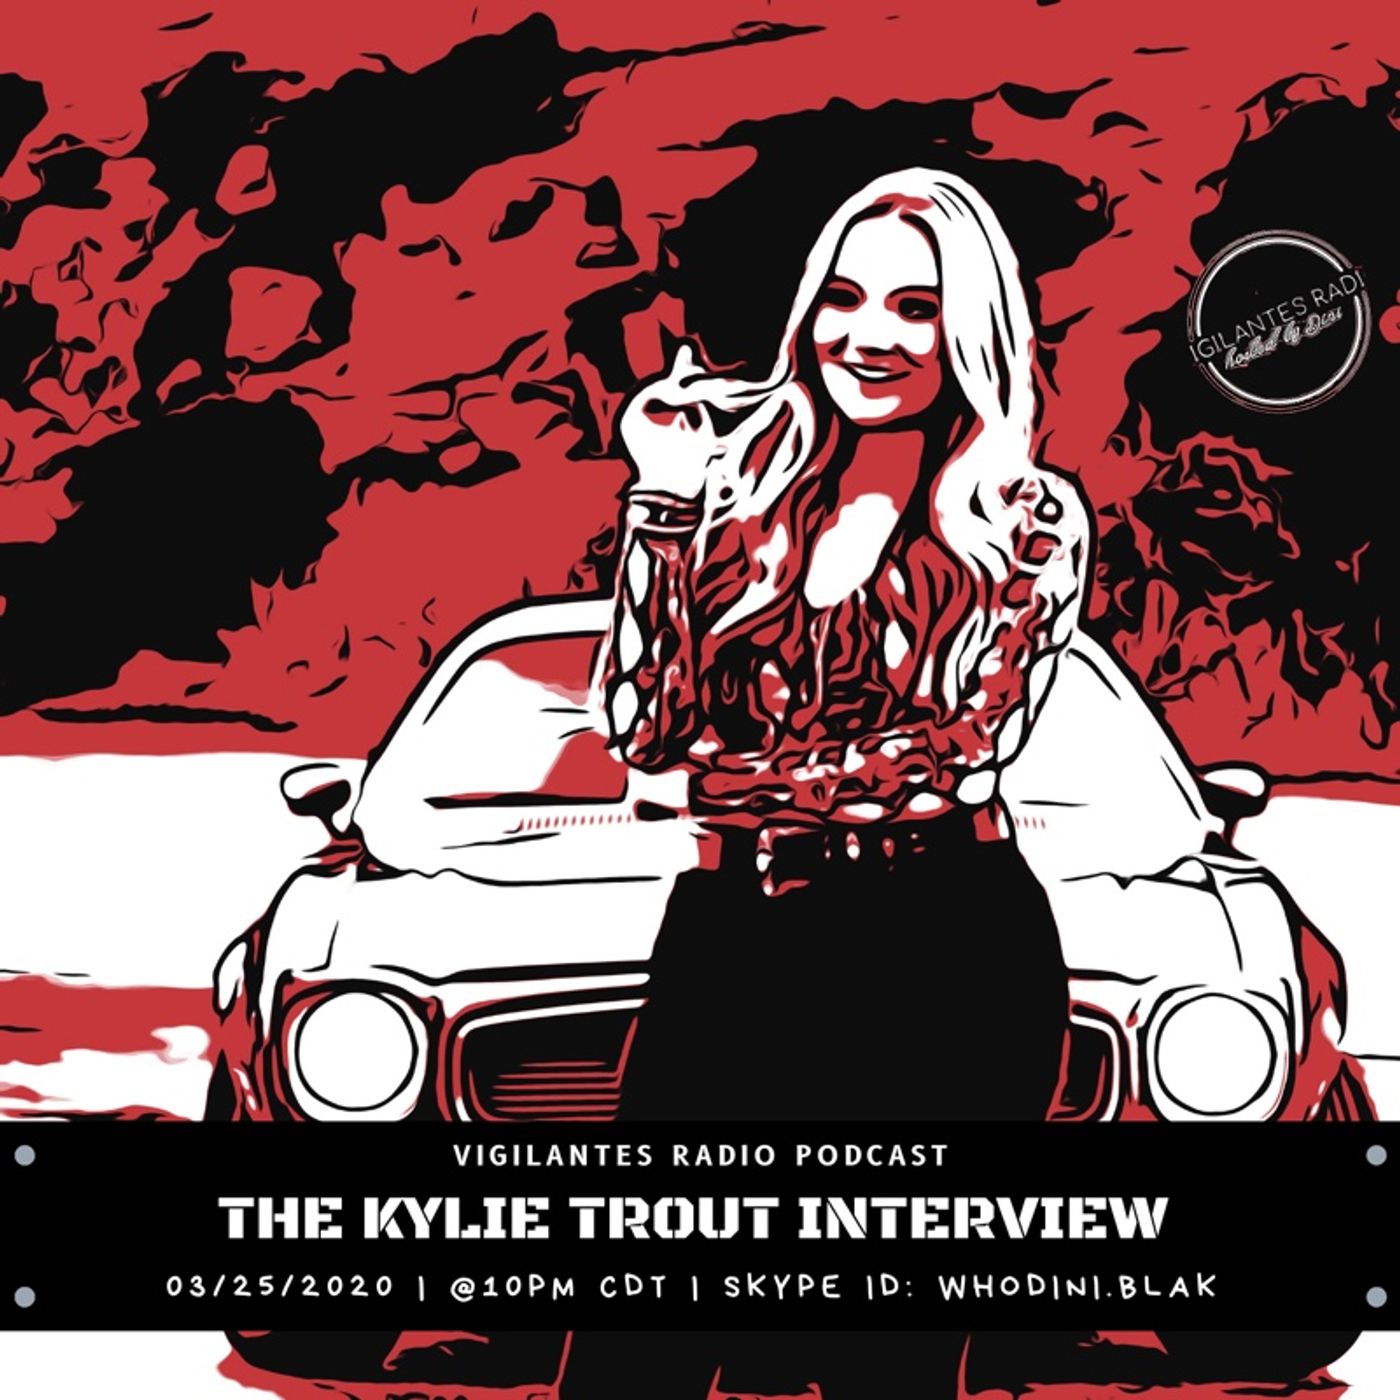 The Kylie Trout Interview. Image